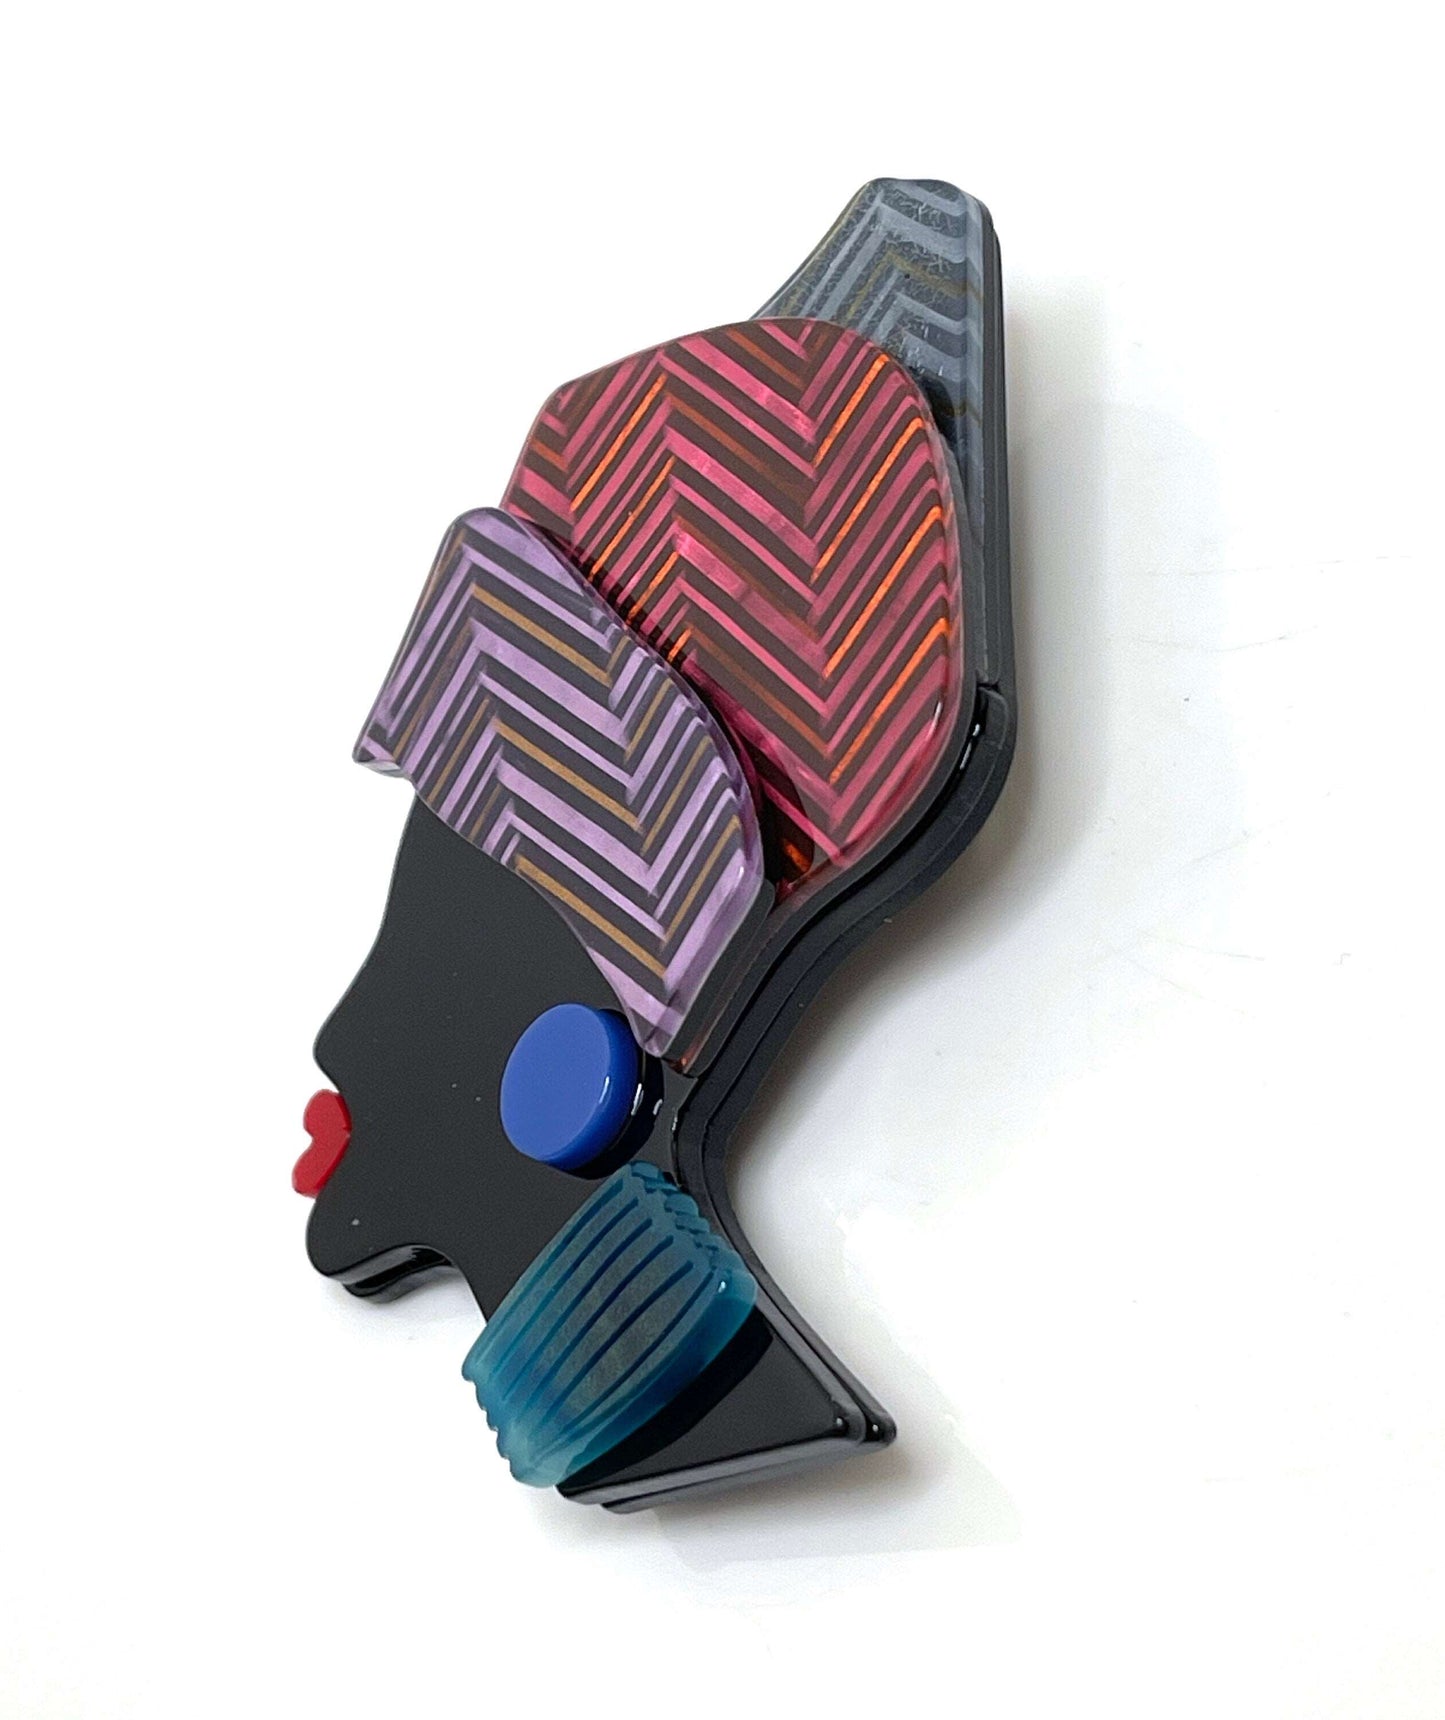 African Lady Brooch, Jamaican Princess Pin, Ethnic Brooch, Fashion Pin for Jacket Scarf, Lady in Cloth Hat, Brooches For Women